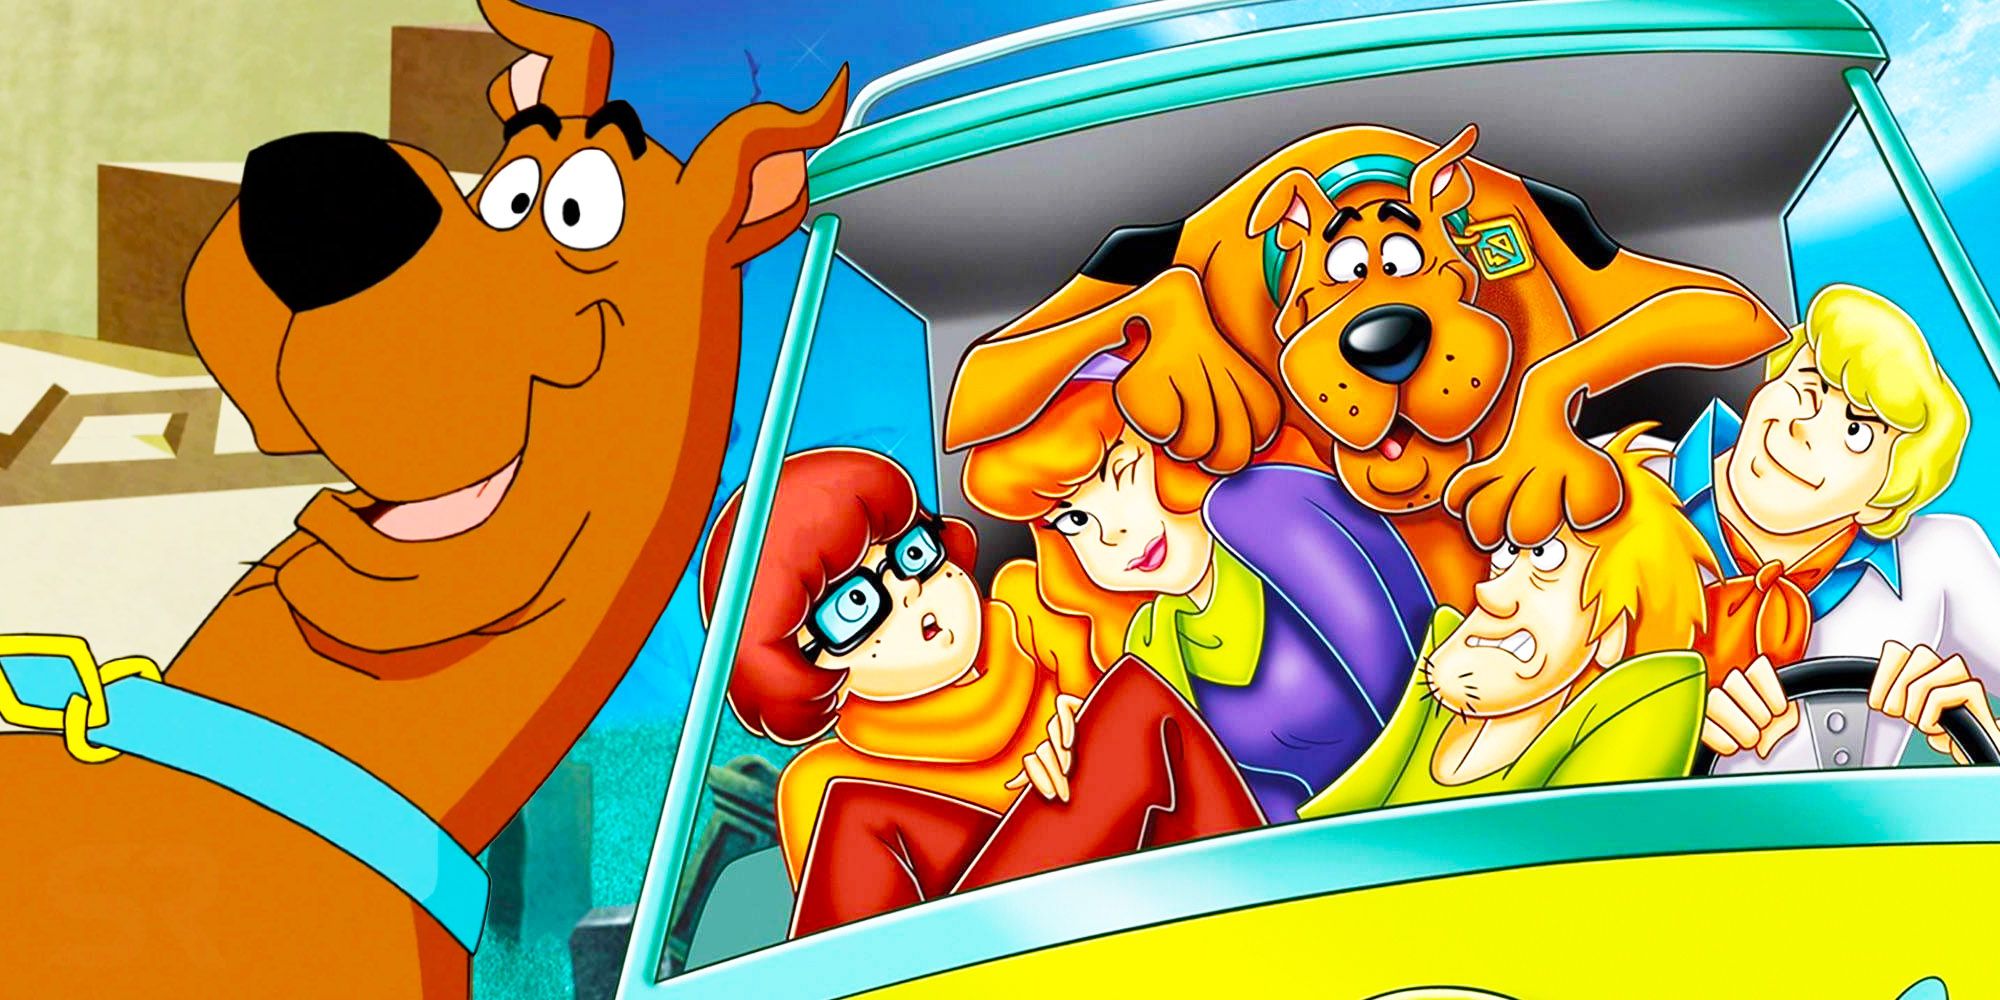 Scooby-Doo, Cartoon, Characters, TV Shows, Movie, & Facts